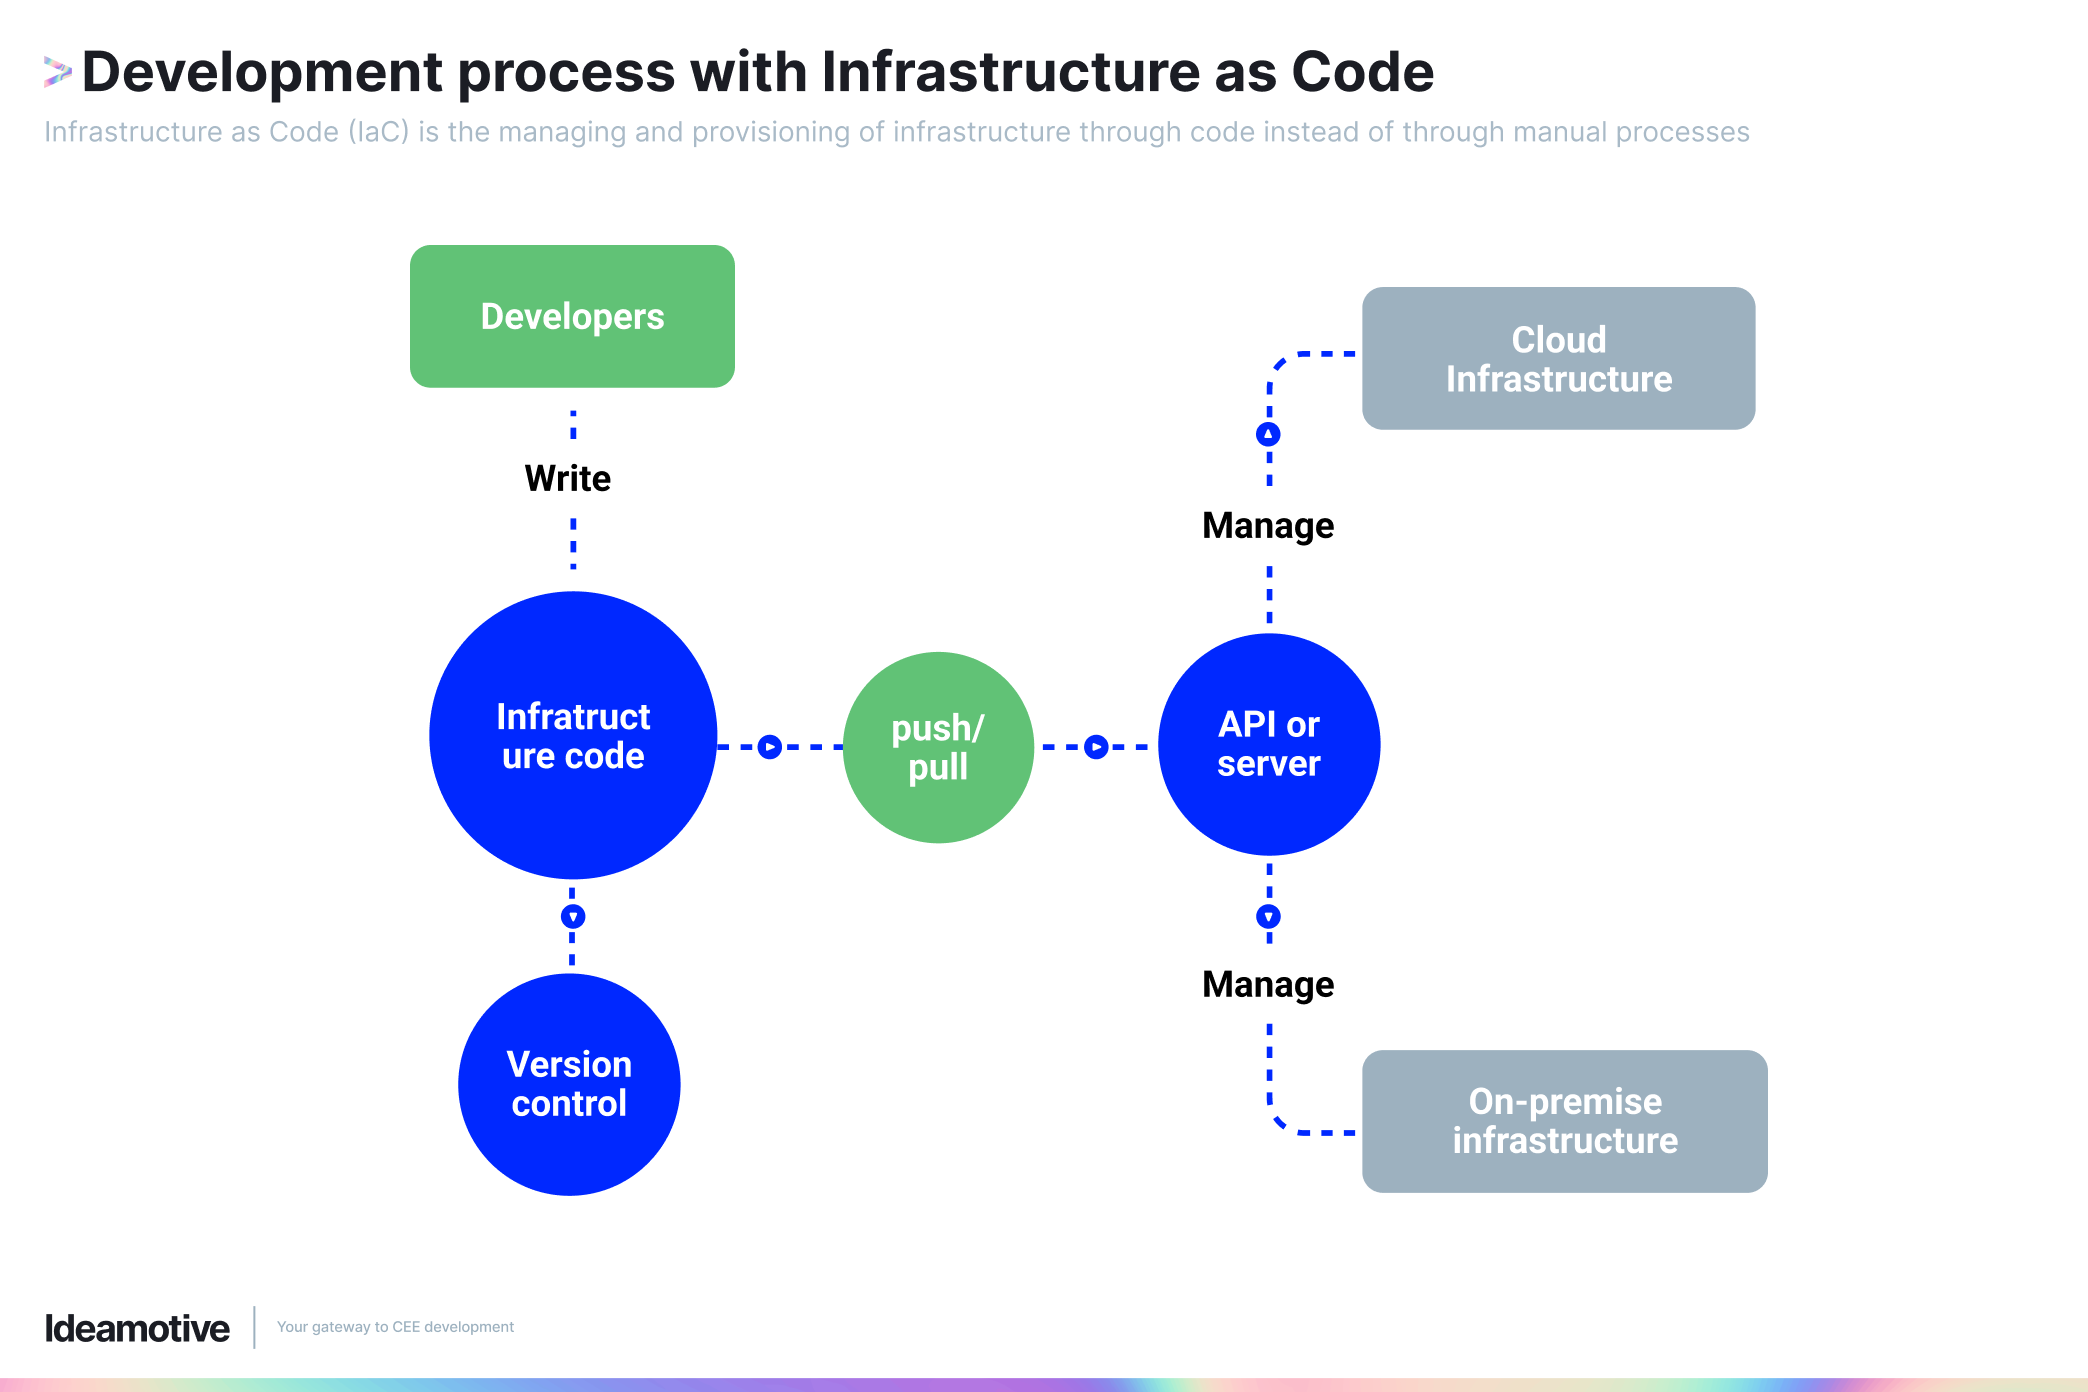 Development process with Infrastructure as Code